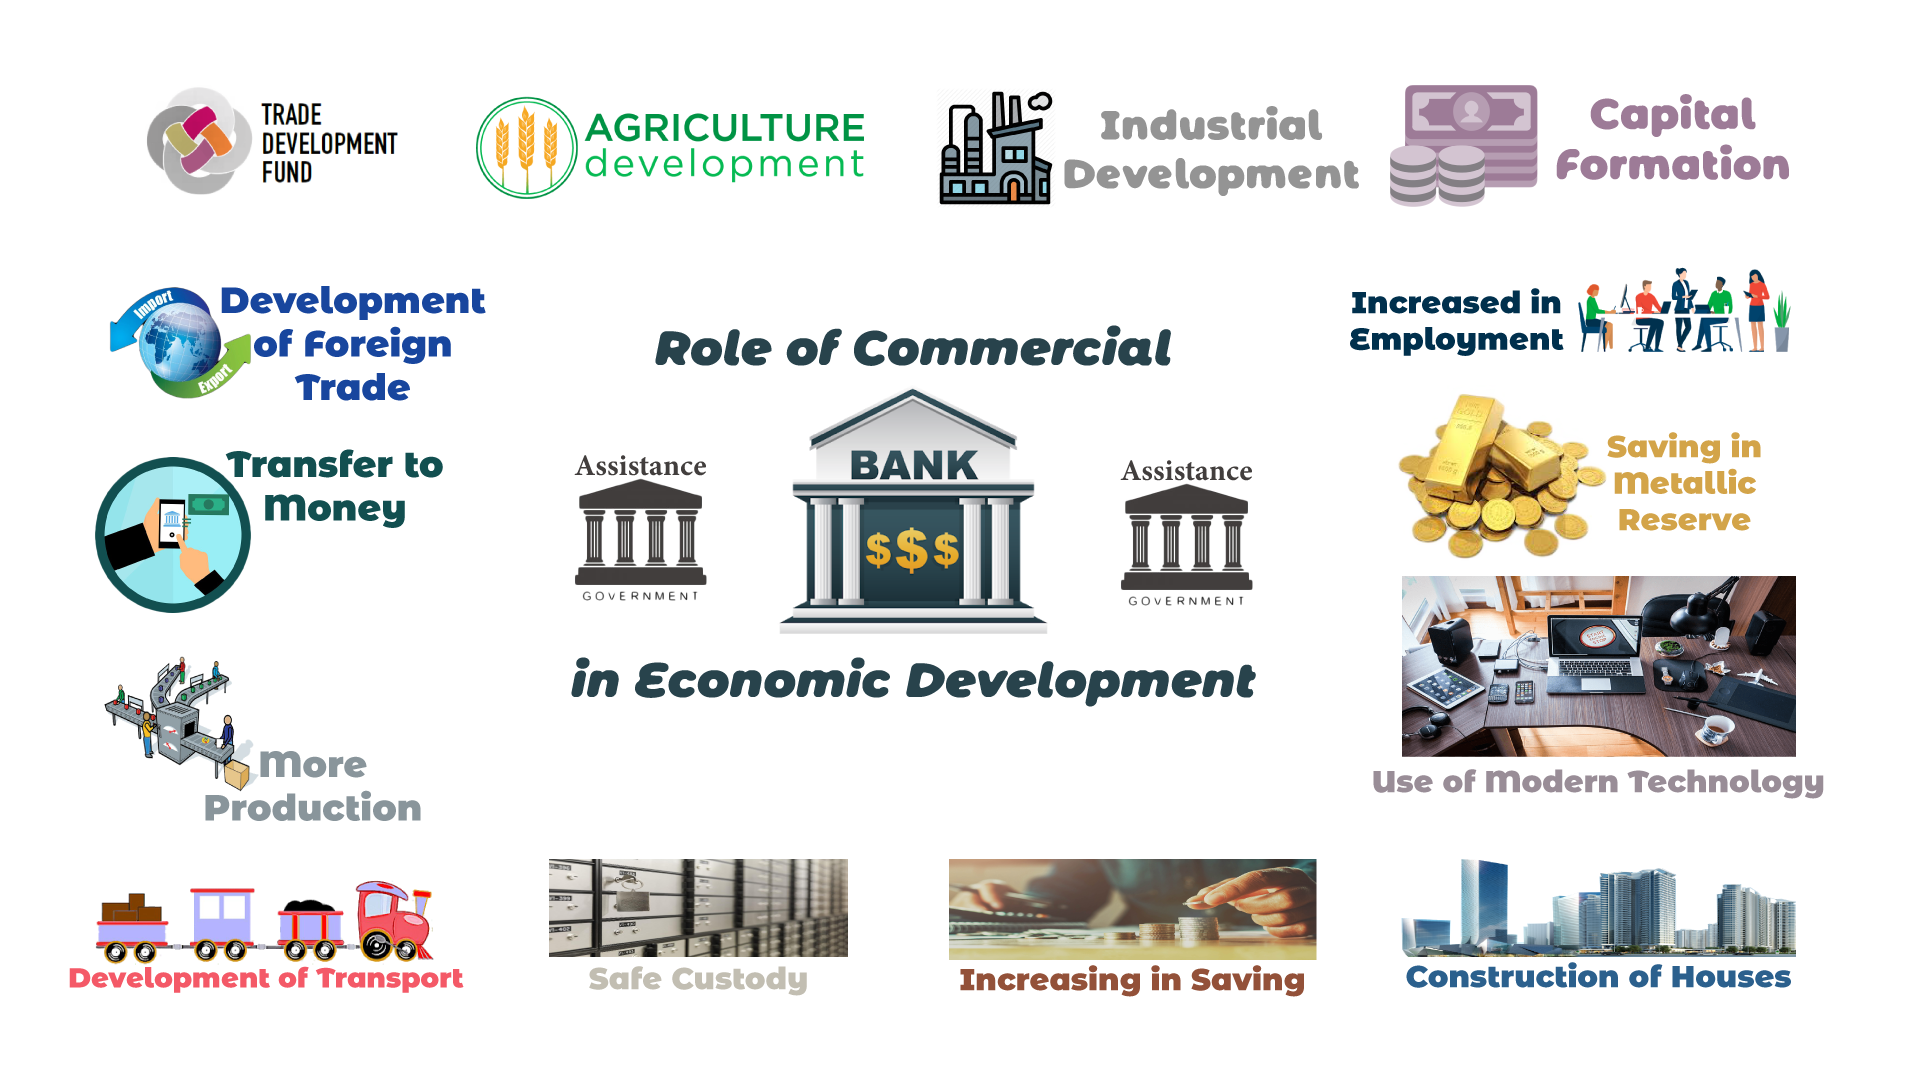 Role of Commercial Banks in Economic Development - Role of Commercial Banks in Economic Development